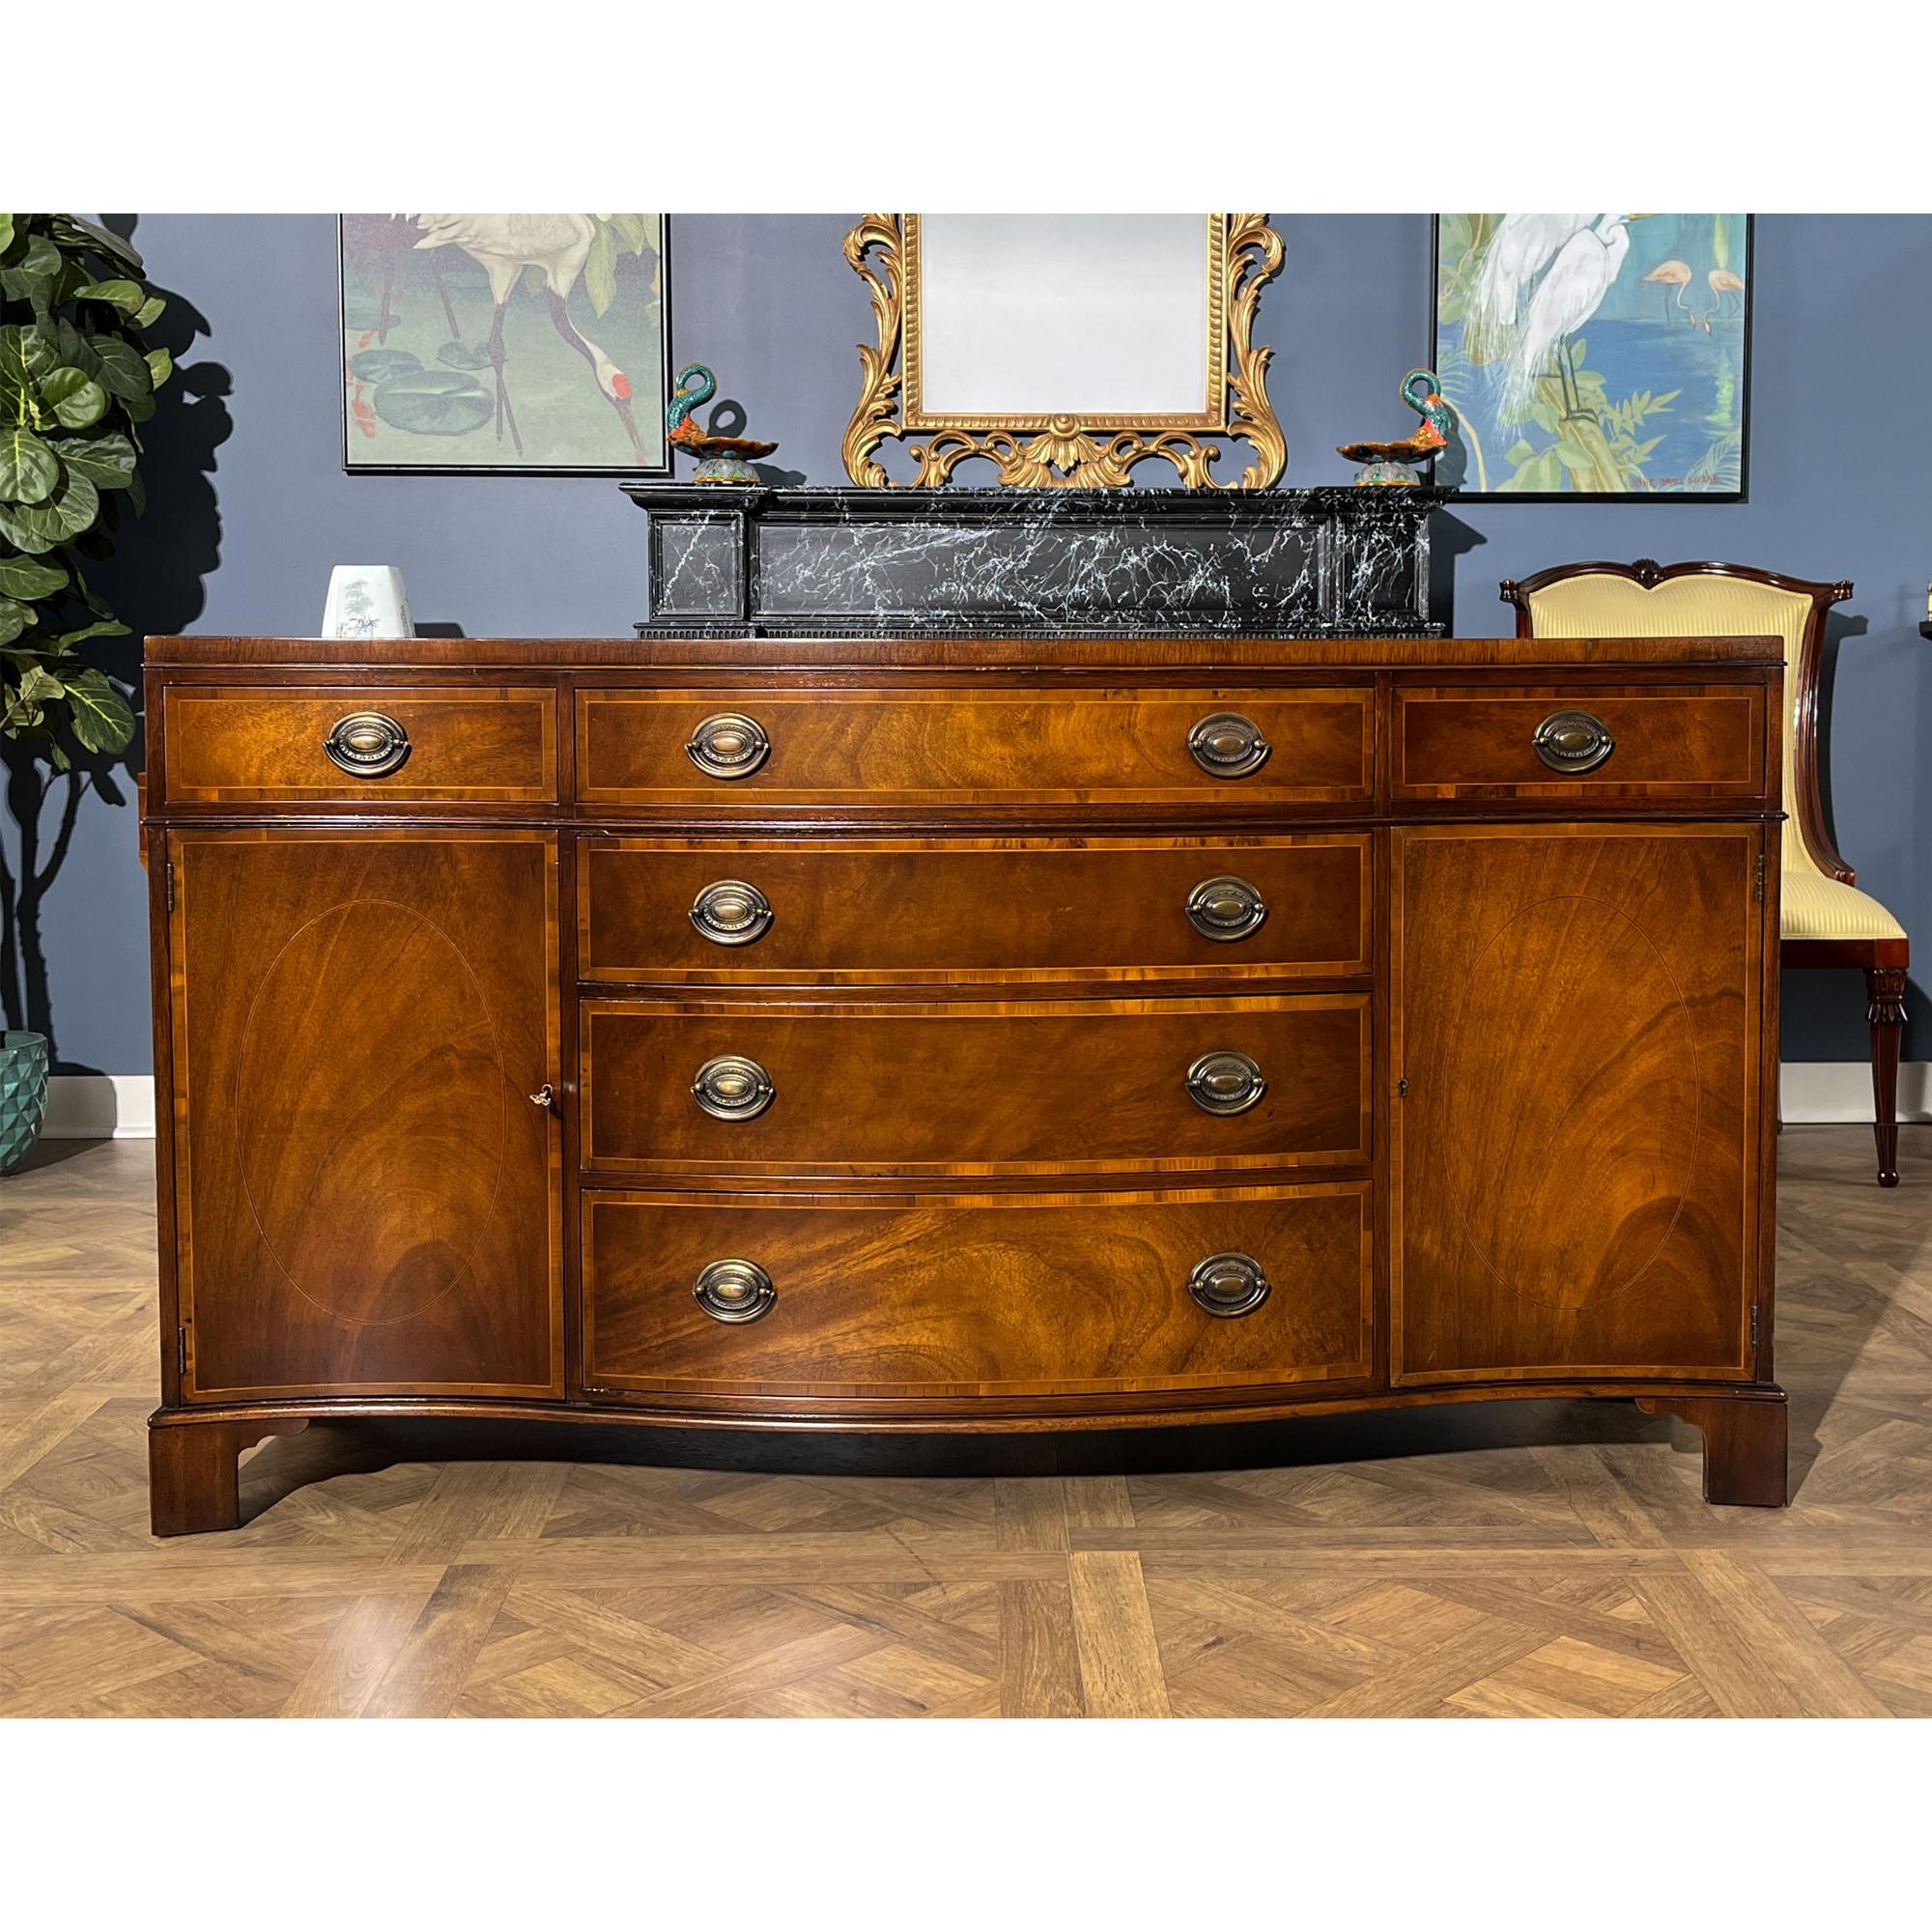 A Vintage Baker Serpentine Sideboard brought to you by Niagara Furniture. A classic serpentine shape this Sideboard features six total drawers and two cabinet doors below to give it a traditional  appearance that is both functional and attractive.